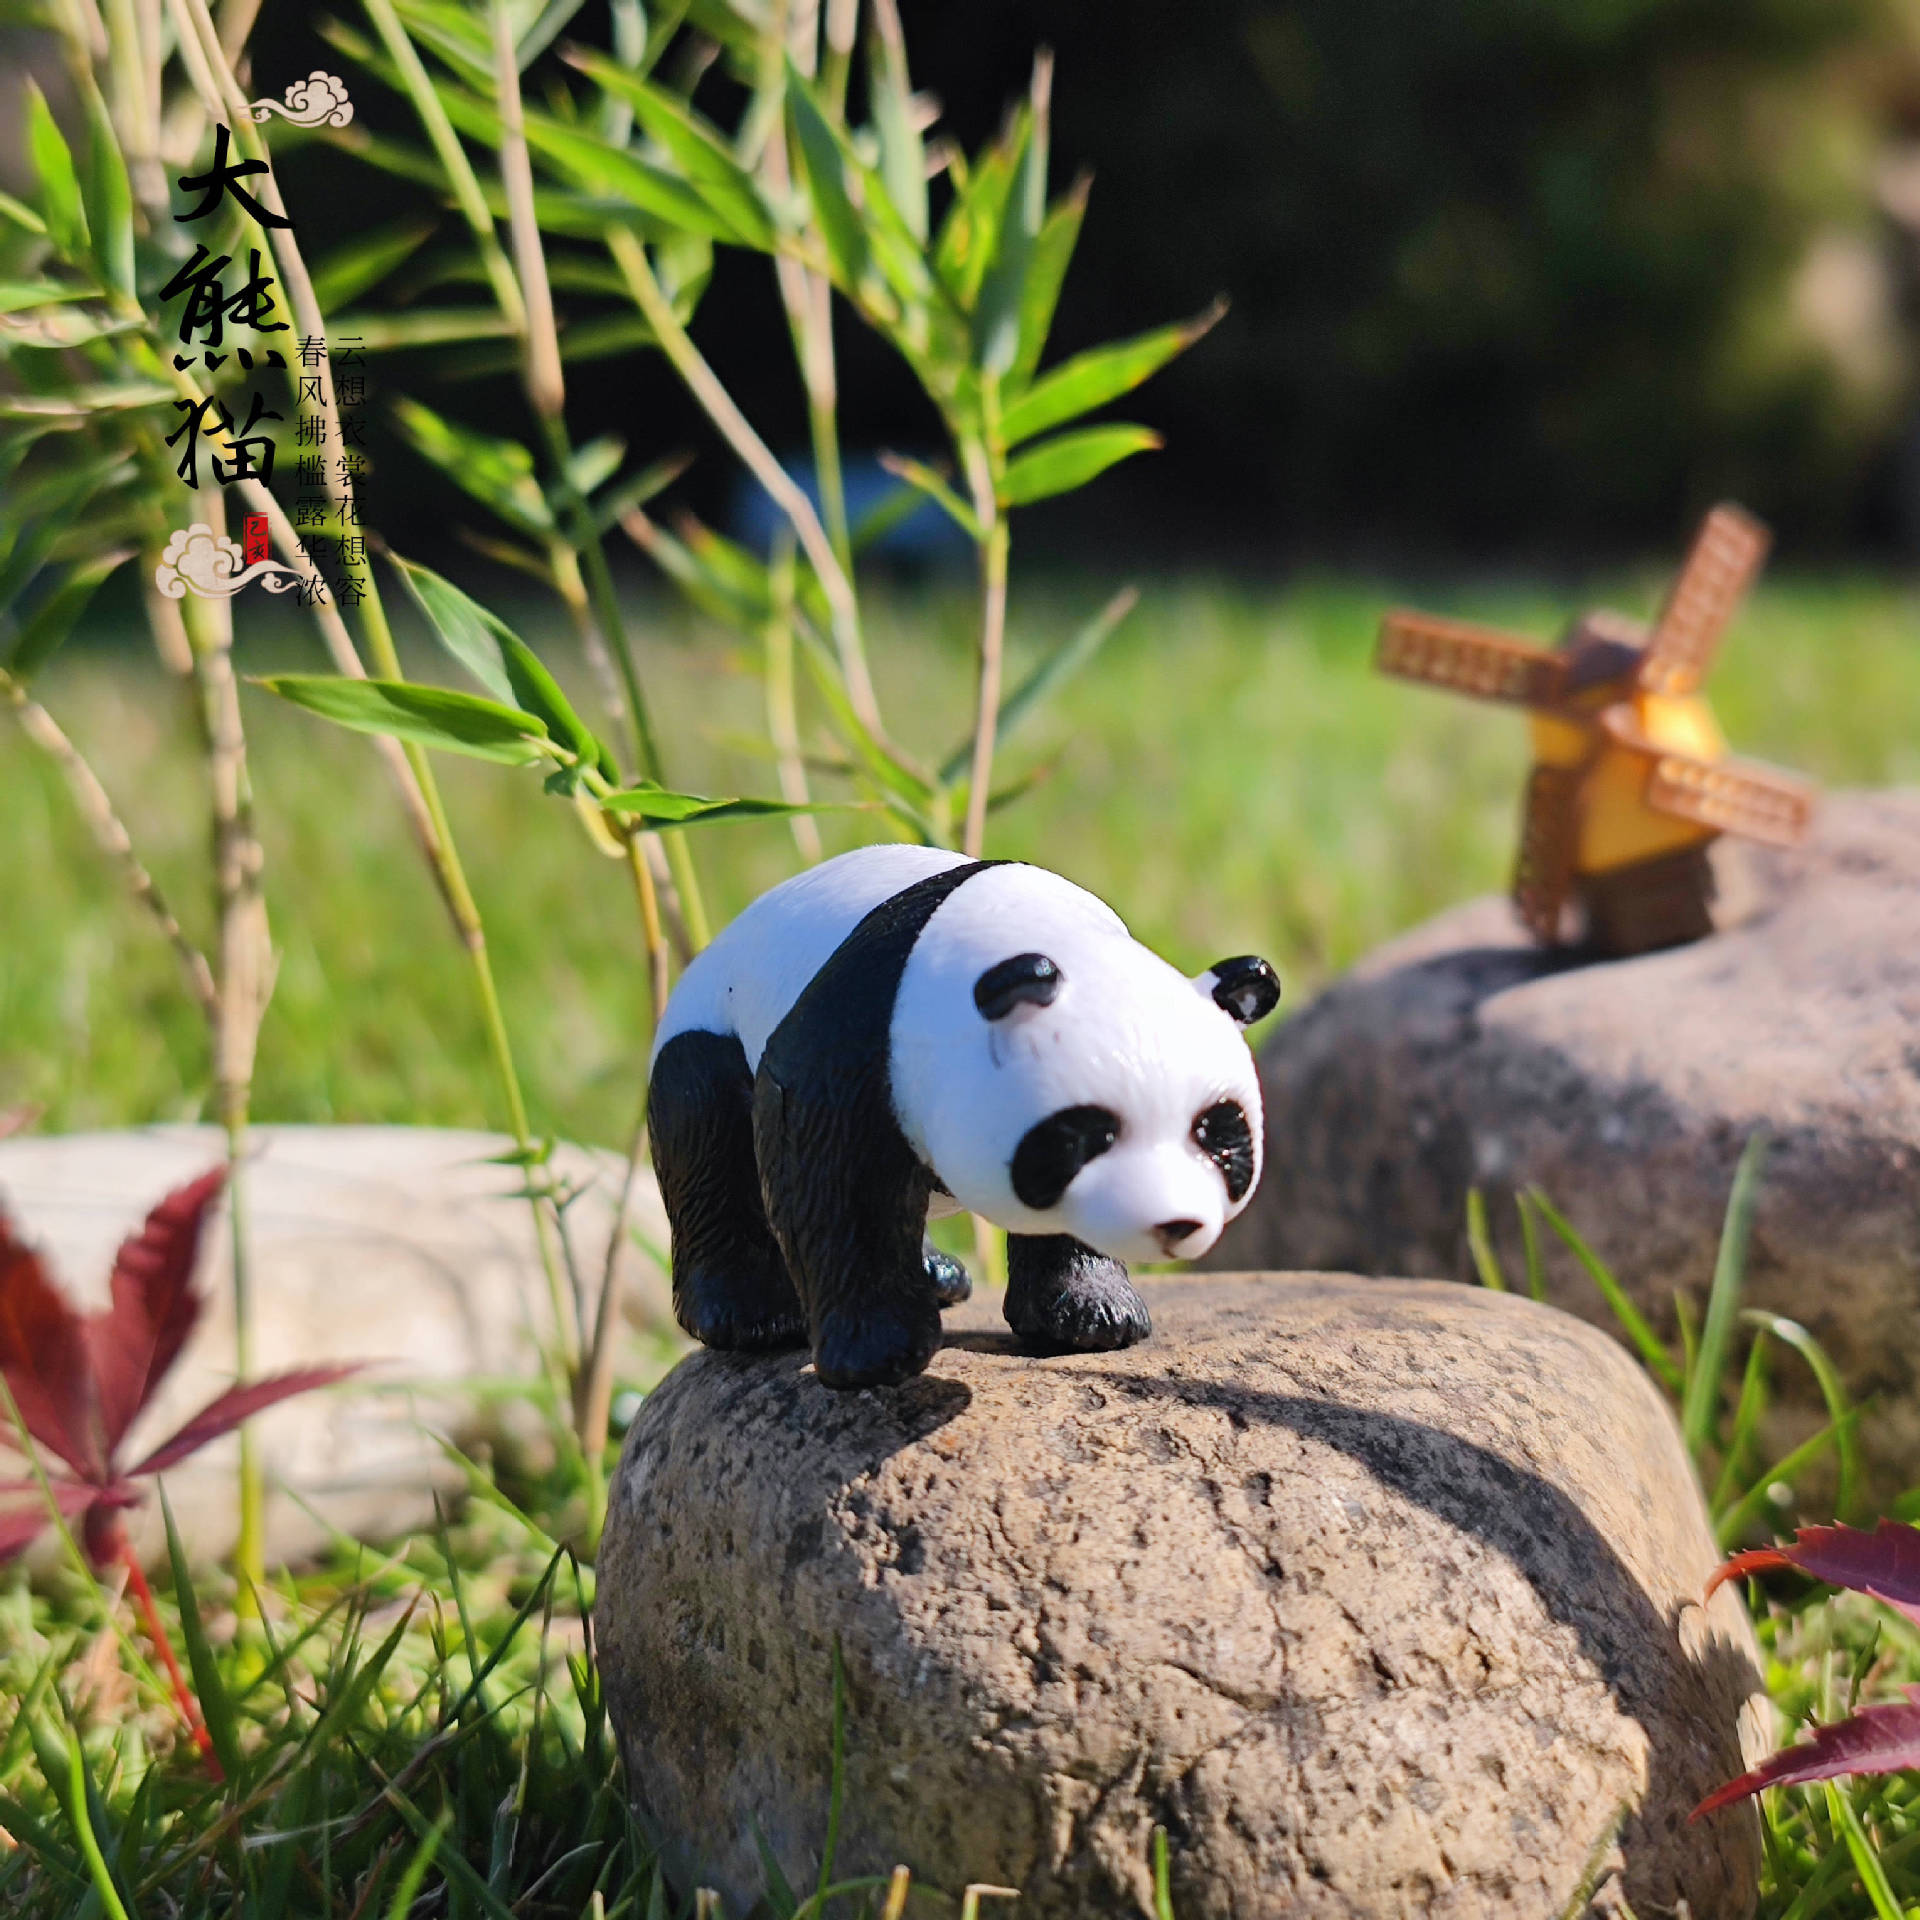 4 Types of Giant Panda Micro Landscape Pvc Crafts Cake Accessories Creative Doll Ornaments